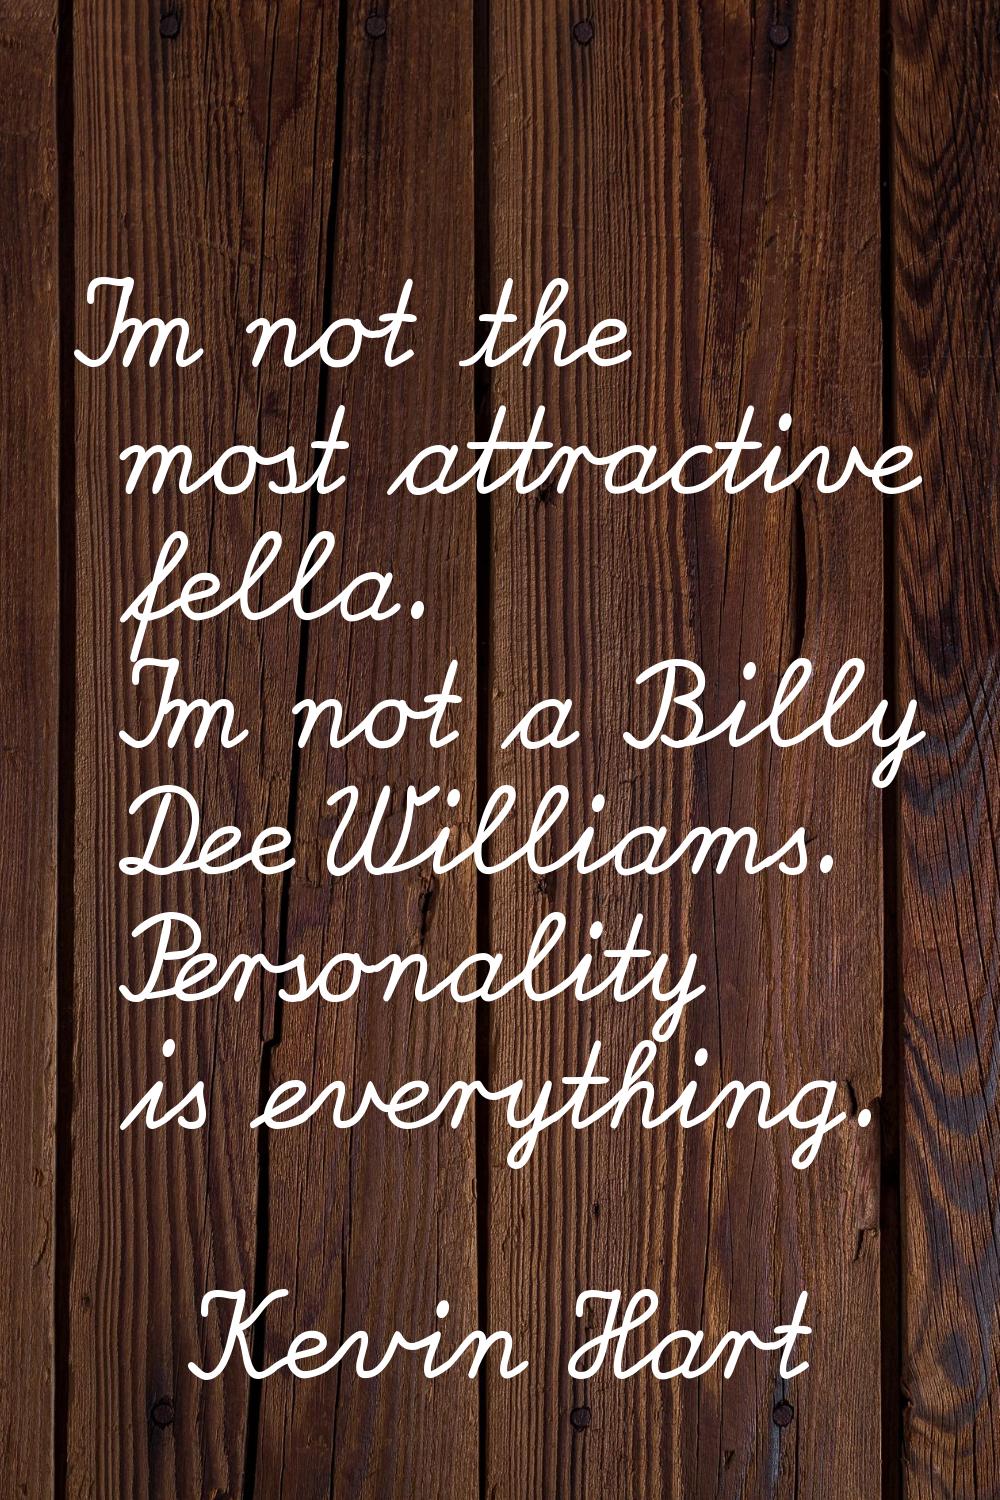 I'm not the most attractive fella. I'm not a Billy Dee Williams. Personality is everything.